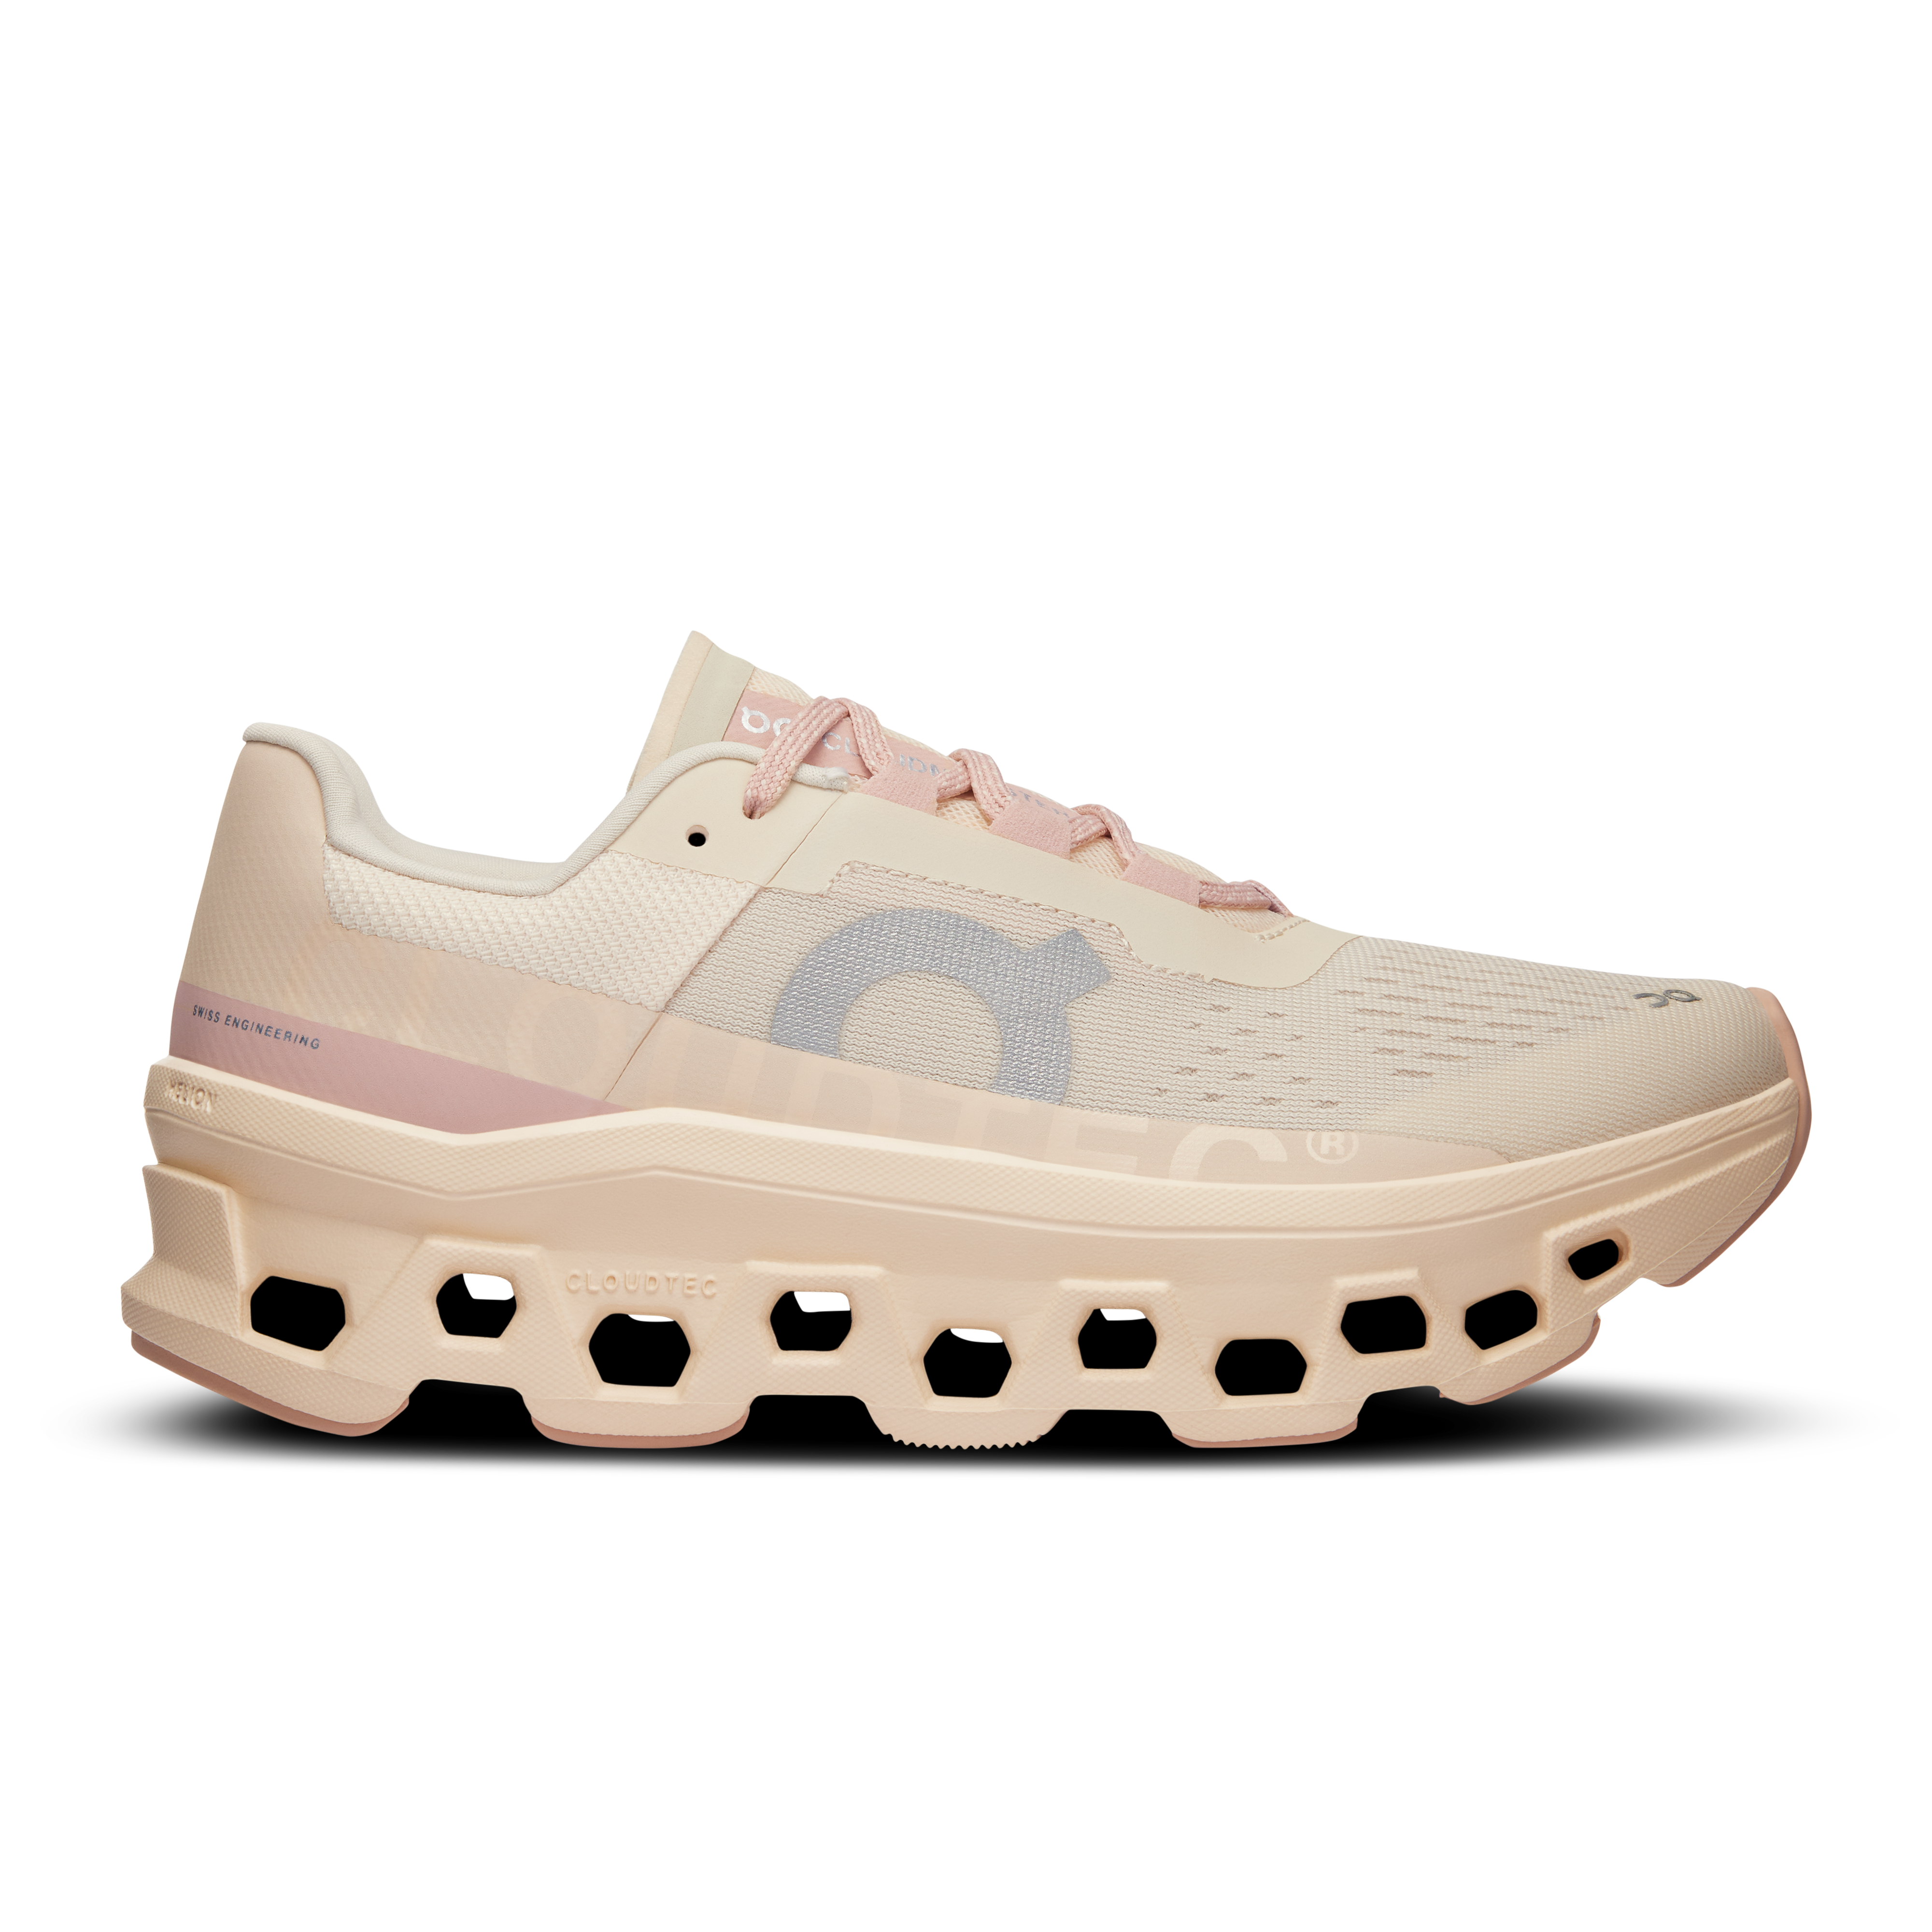 ON Women's Cloudmonster Running Trainers - Mist/Blueberry